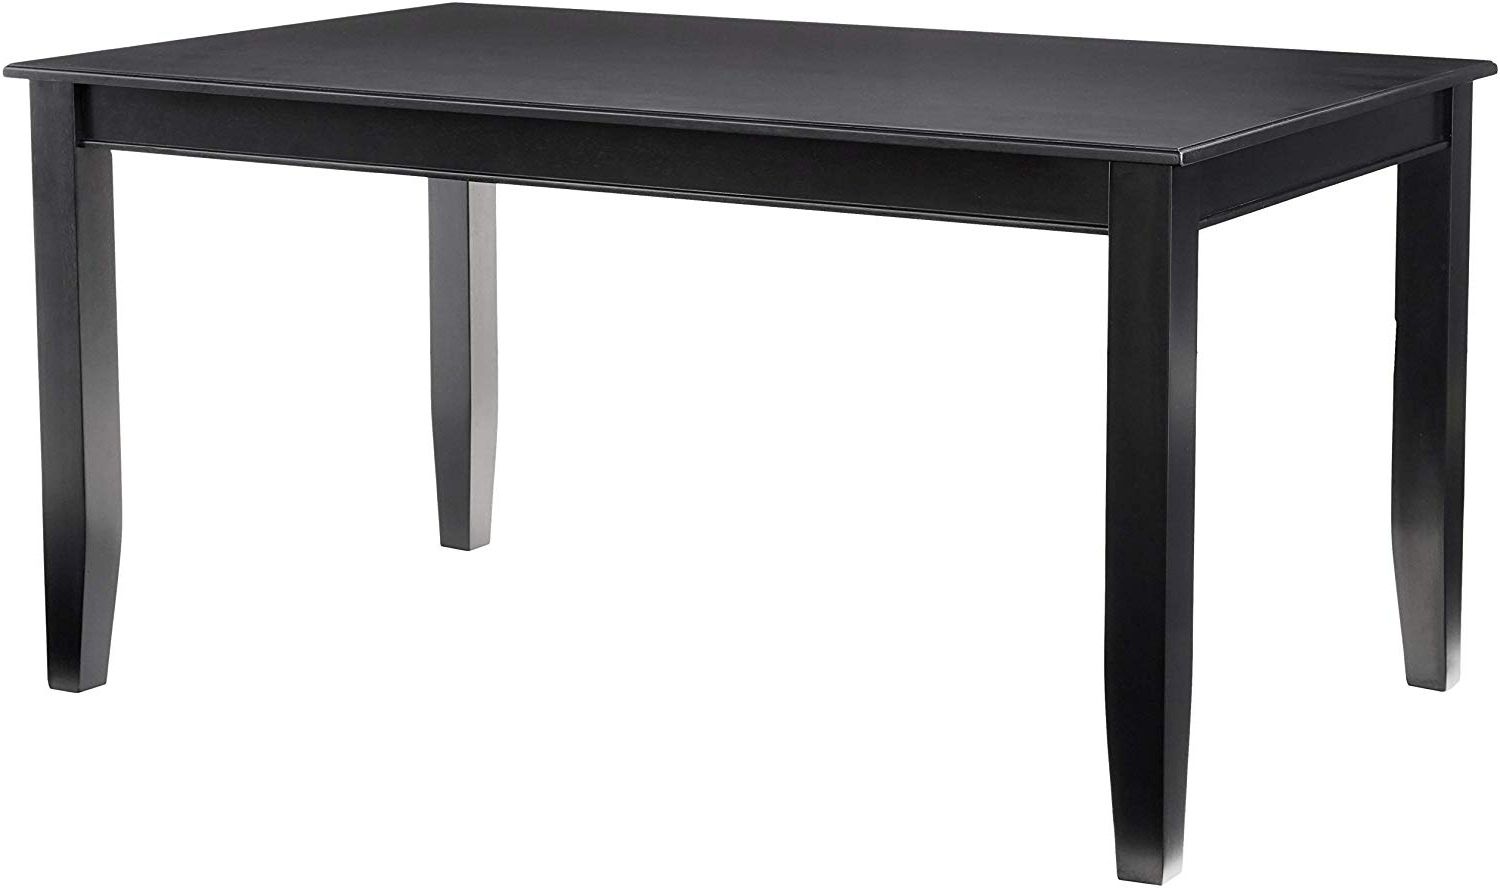 Rectangular Dining Tables With Most Up To Date Dudley Rectangular Dining Table 36"x60" In Black Finish (View 3 of 30)